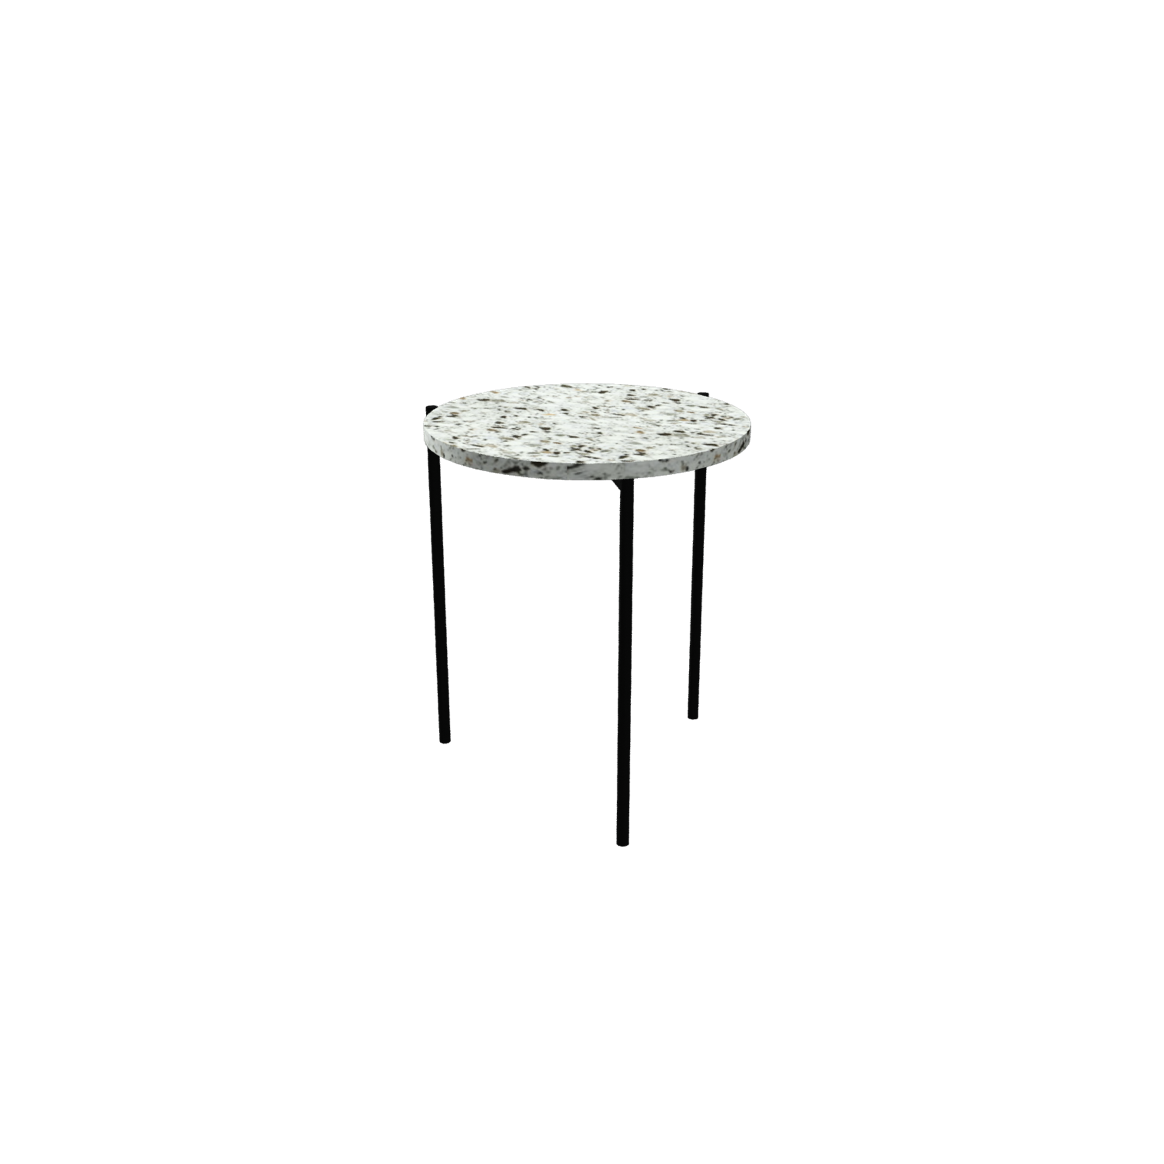 SIDE TABLE, ROUND - Customer's Product with price 1800.00 ID nl69Q007fFa8q1MLEhEzlXTT